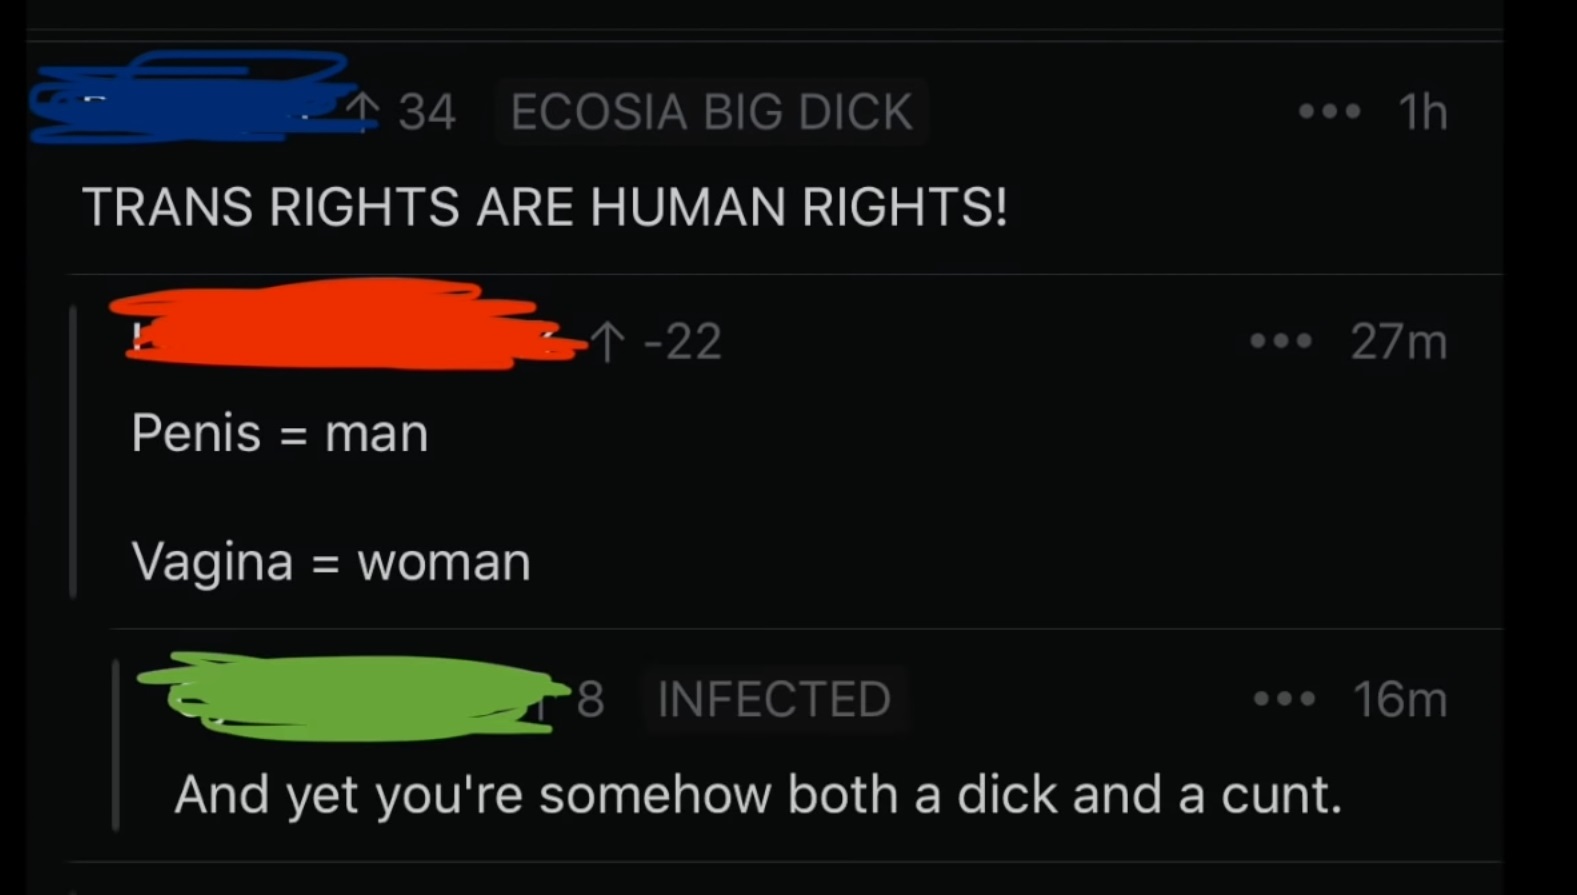 light - .. 1h ..^34 Ecosia Big Dick Trans Rights Are Human Rights! 3122 27m Penis man Vagina woman 8 Infected ... 16m And yet you're somehow both a dick and a cunt.